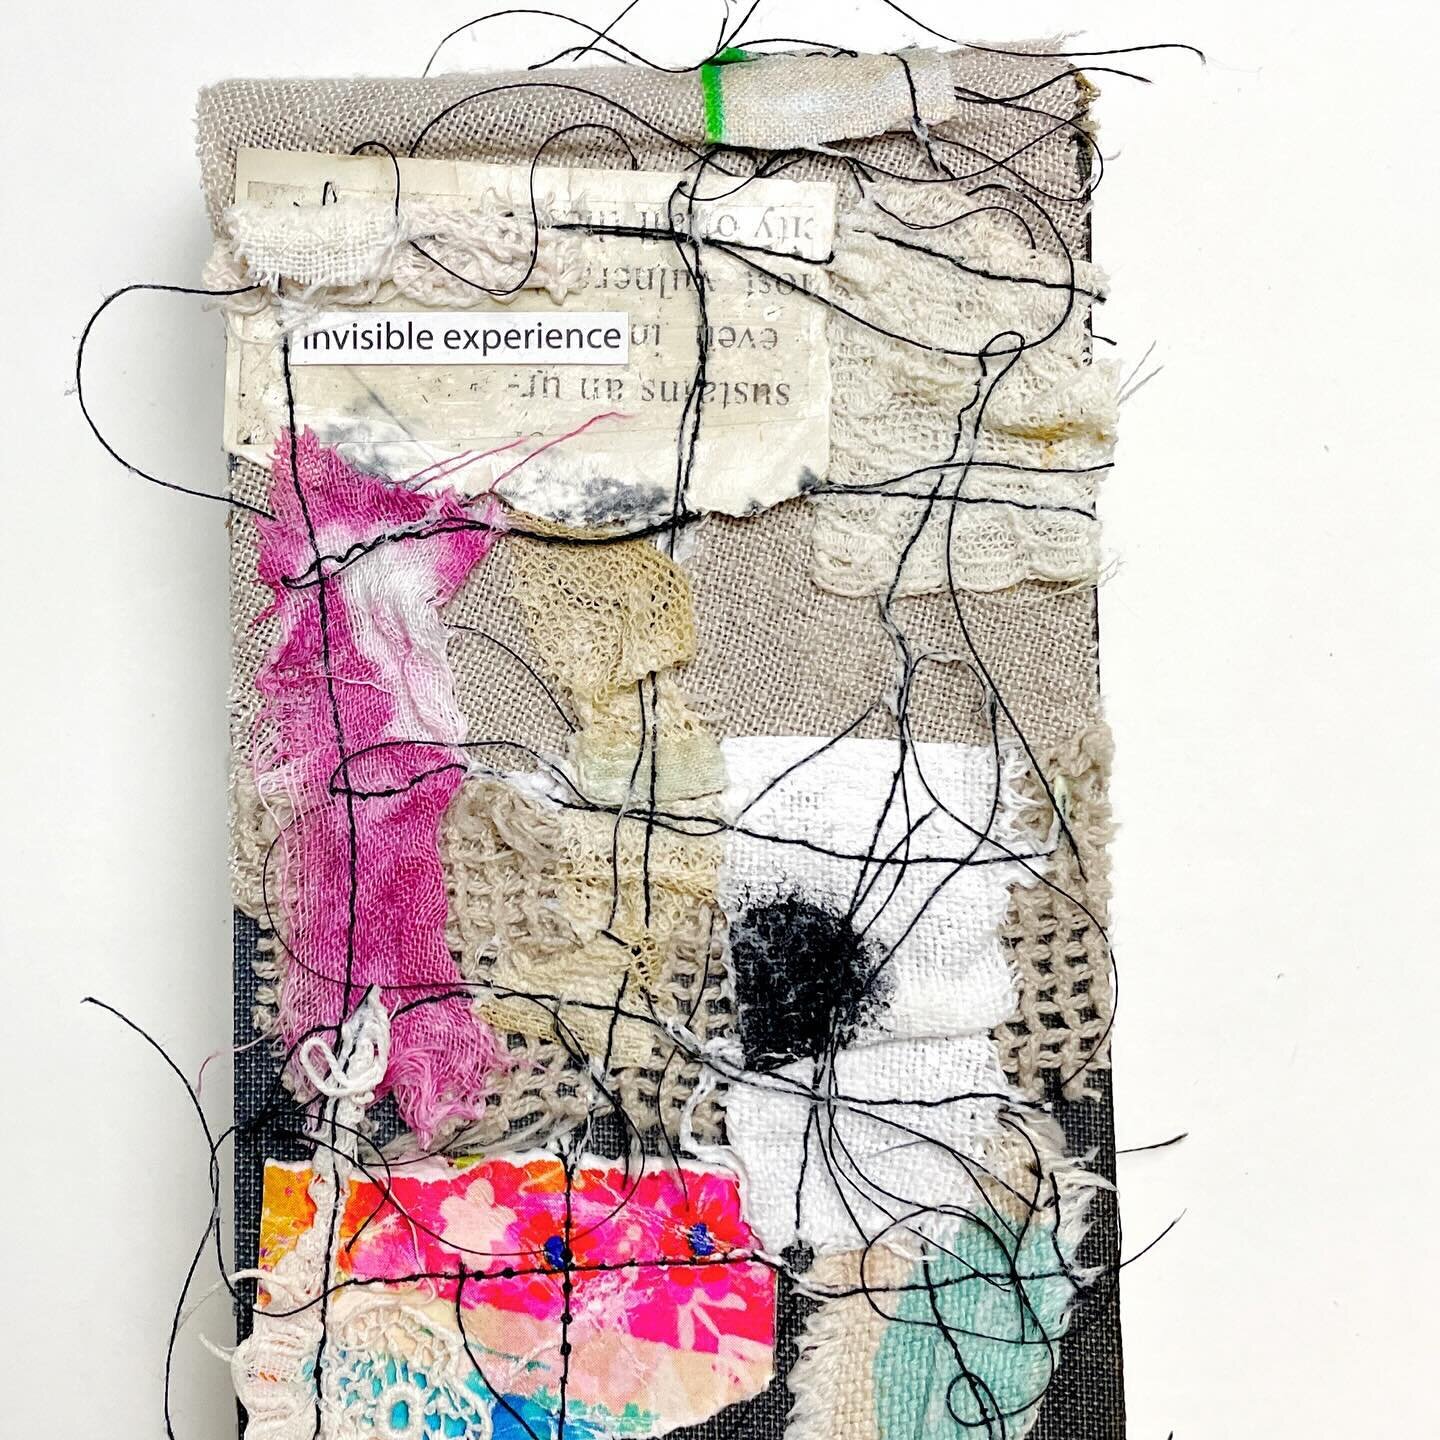 Skinny Mini Journal - INVISIBLE EXPERIENCE. 💕

&ldquo;Behind every visible outcome lies an invisible experience, quietly shaping our path forward.&rdquo; - Unknown

#handmadejournals #artinspiration #mixedmediaart #artjournaling #visualjournaling #c